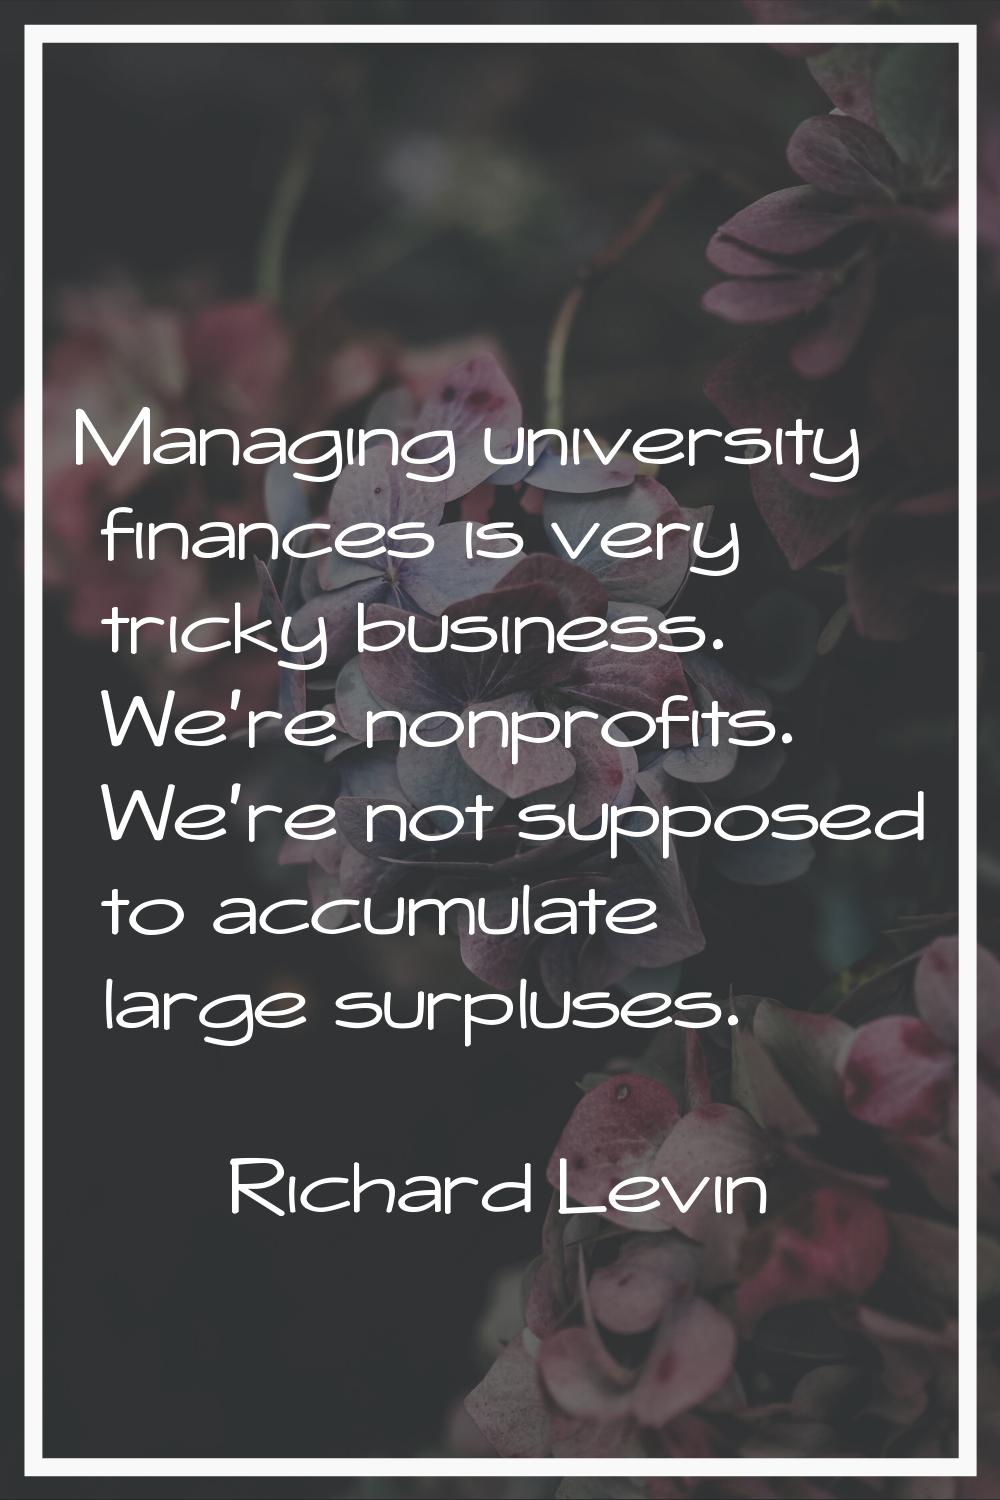 Managing university finances is very tricky business. We're nonprofits. We're not supposed to accum